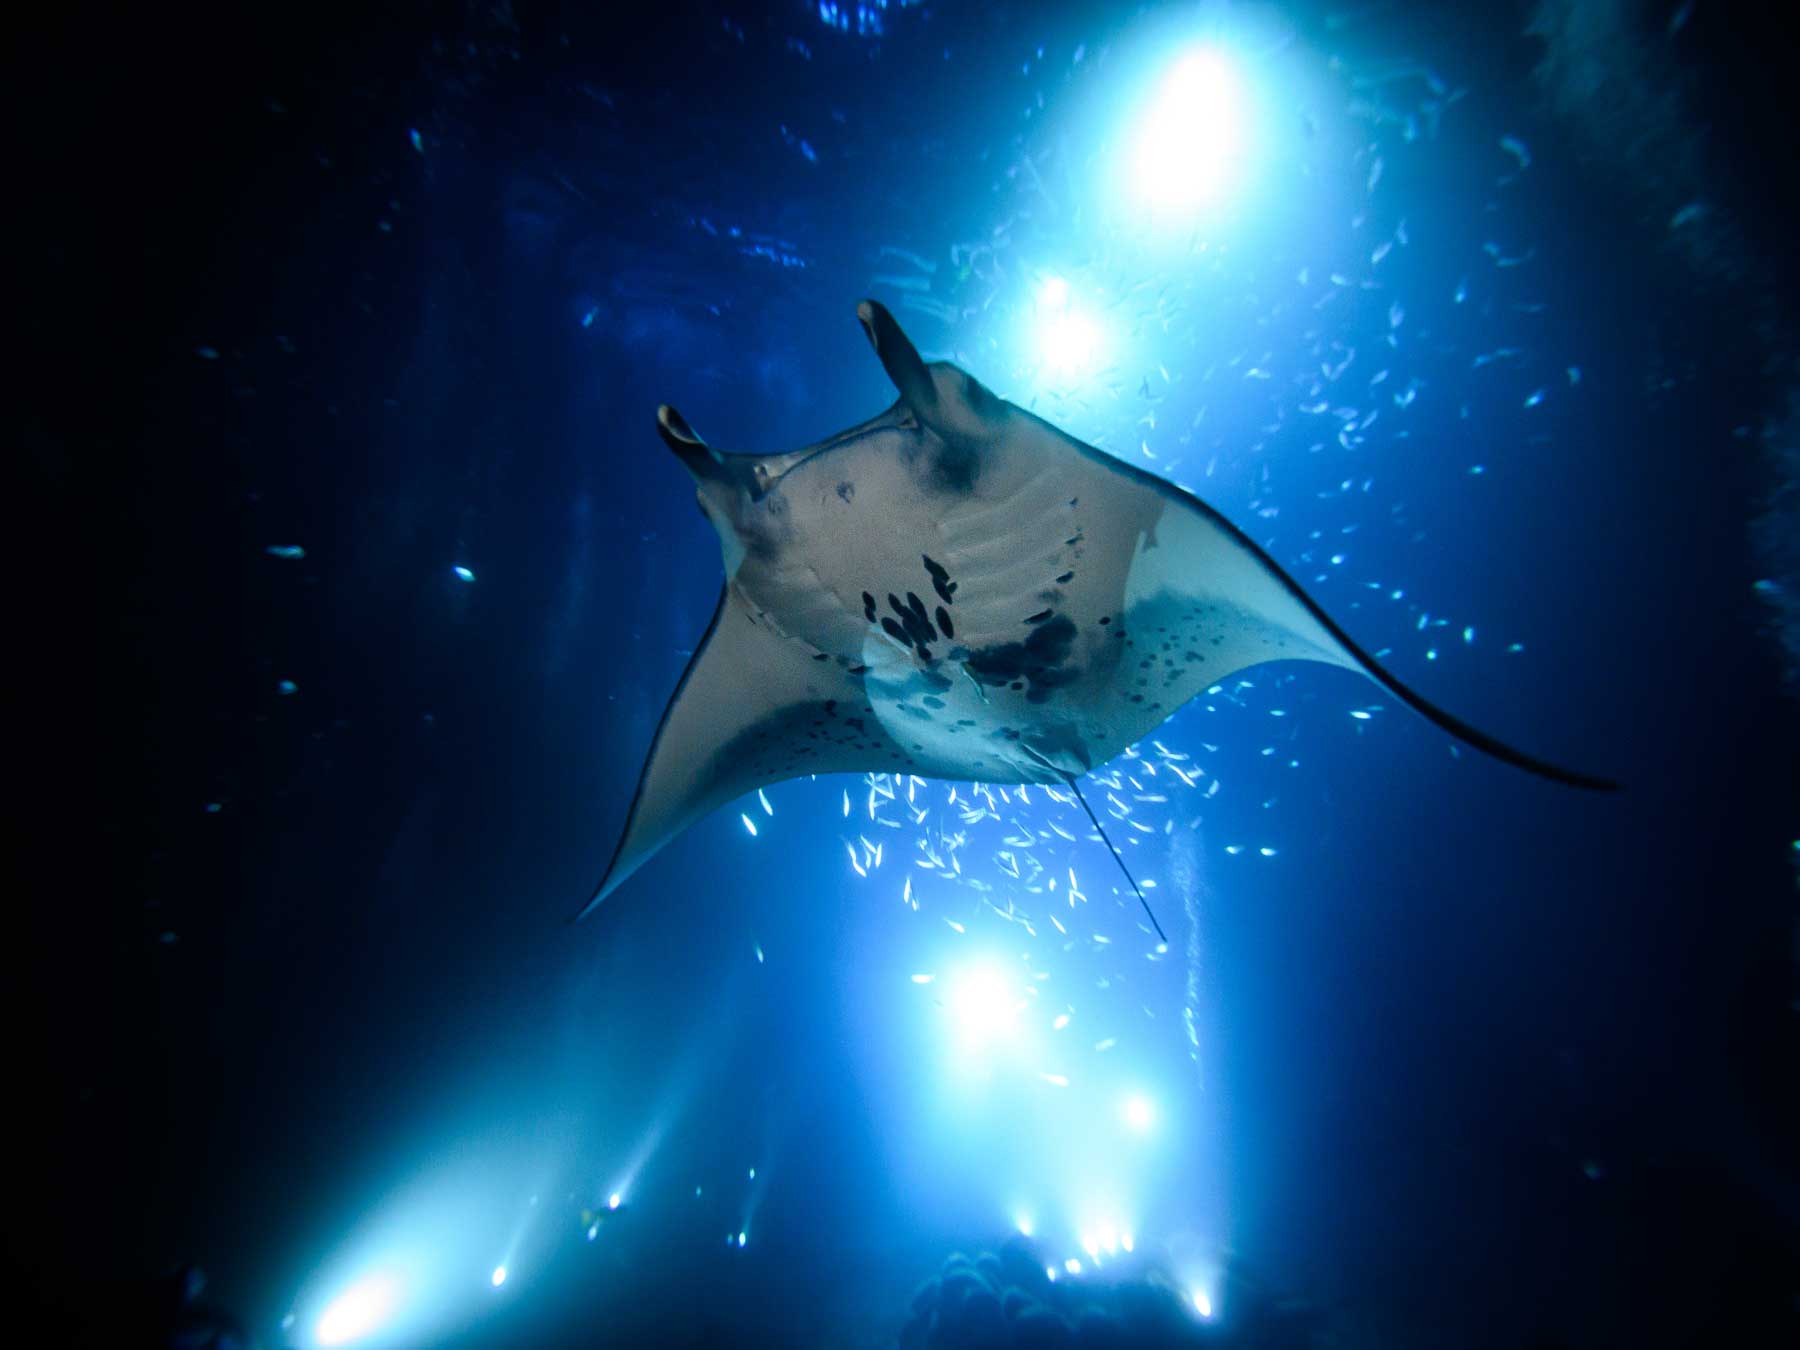 Shooting Manta Rays at Night Without Strobes